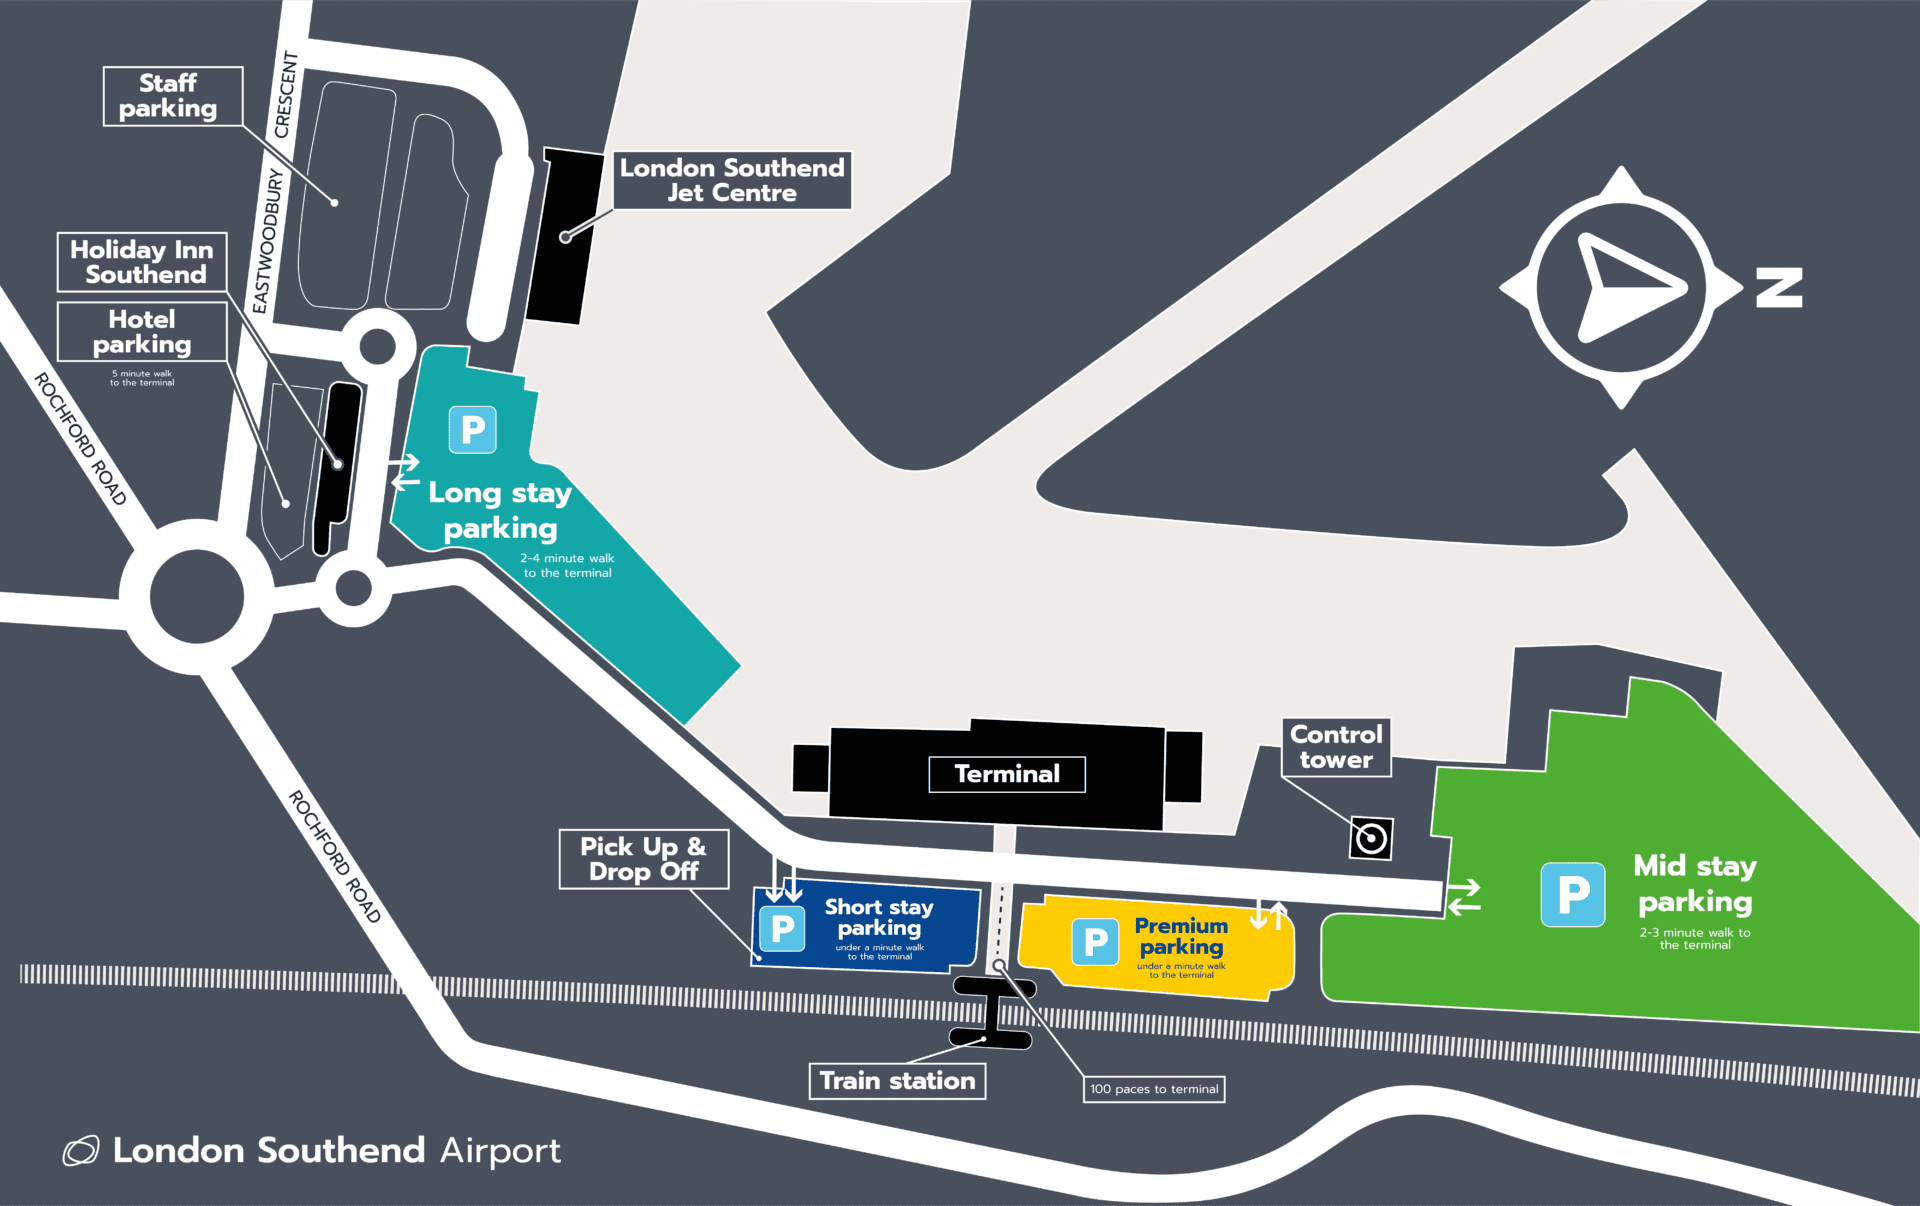 Book official onsite parking at London Southend Airport. A map of all car parks, including Short Stay, Premium, Mid Stay and Long Stay.